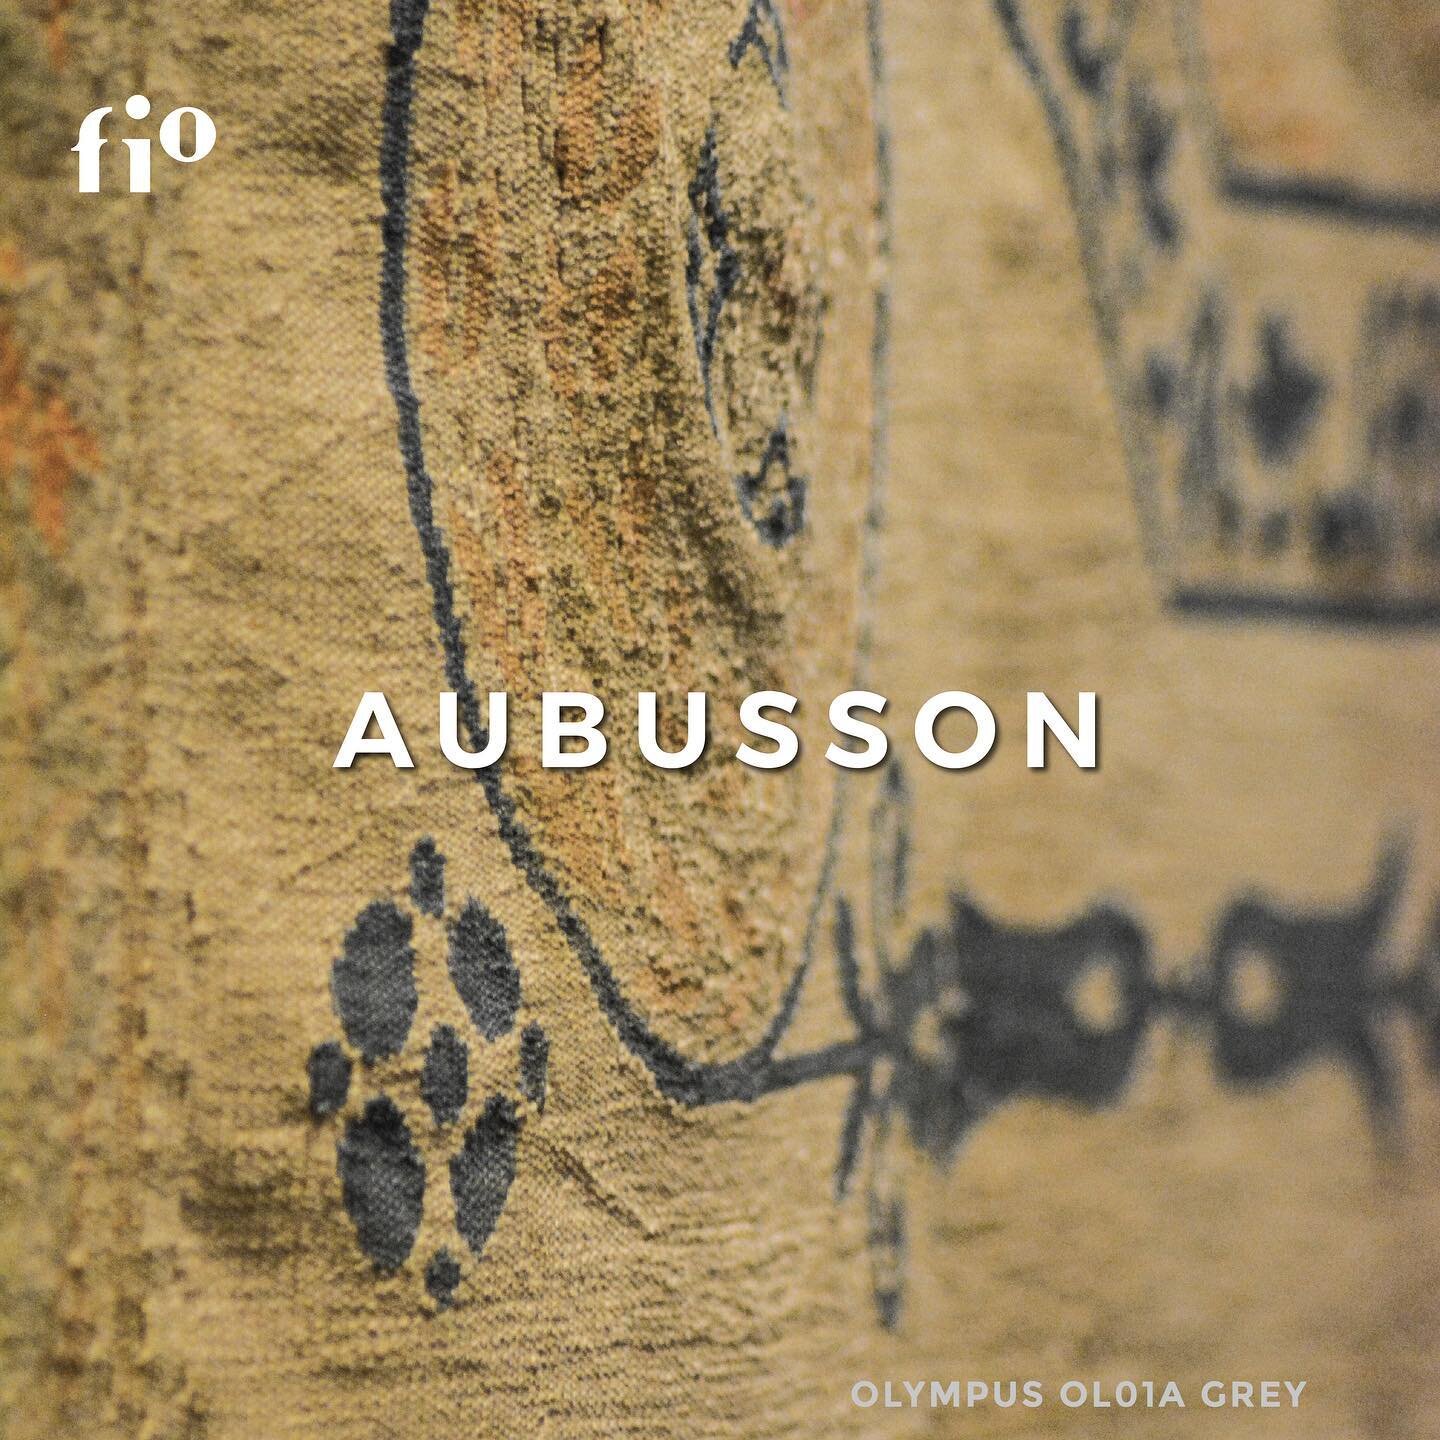 Pamper your eyes with this artistic rugs from Aubusson Collection.

To find the best rug for your space, contact our sales consultant at: 
WA: ‭0811 8252 900‬
www.fio.co.id
Tokopedia, Shopee: Fio Carpet